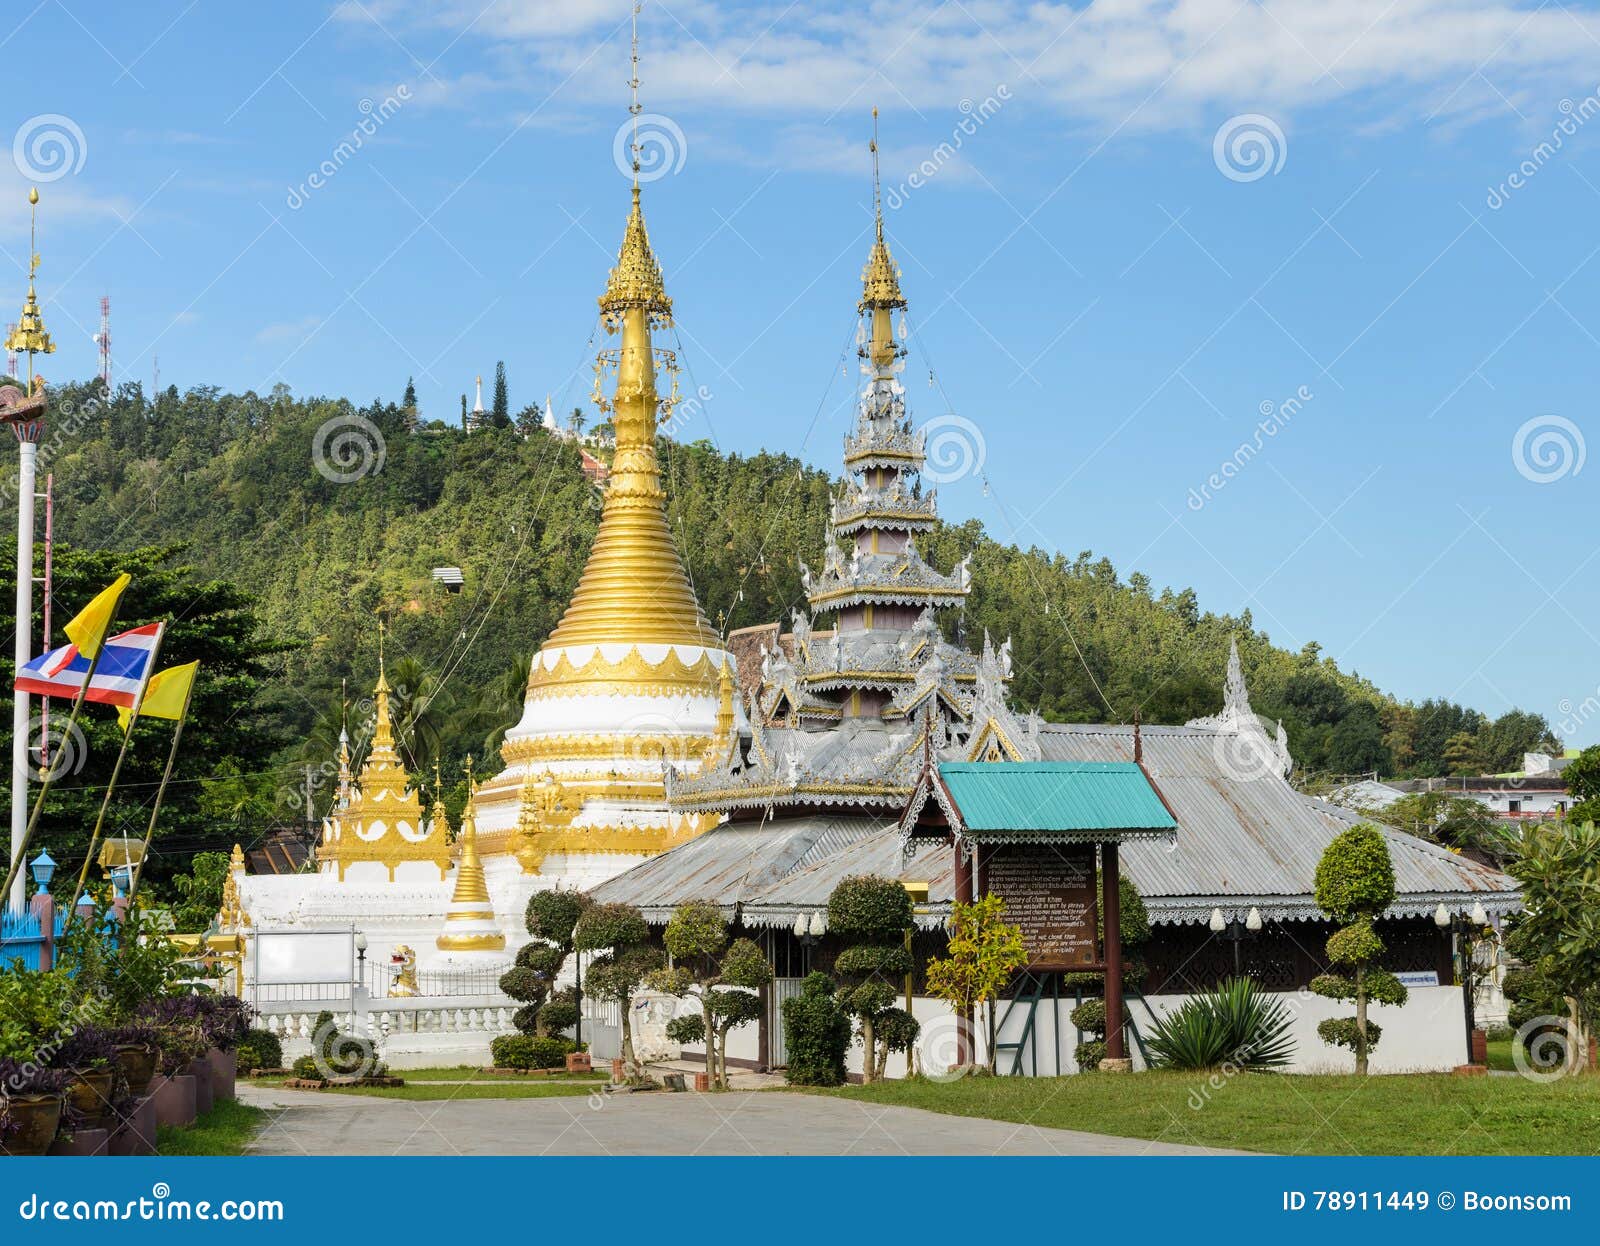 Burmese Style Temple In Mae Hong Son, Thailand Stock Image